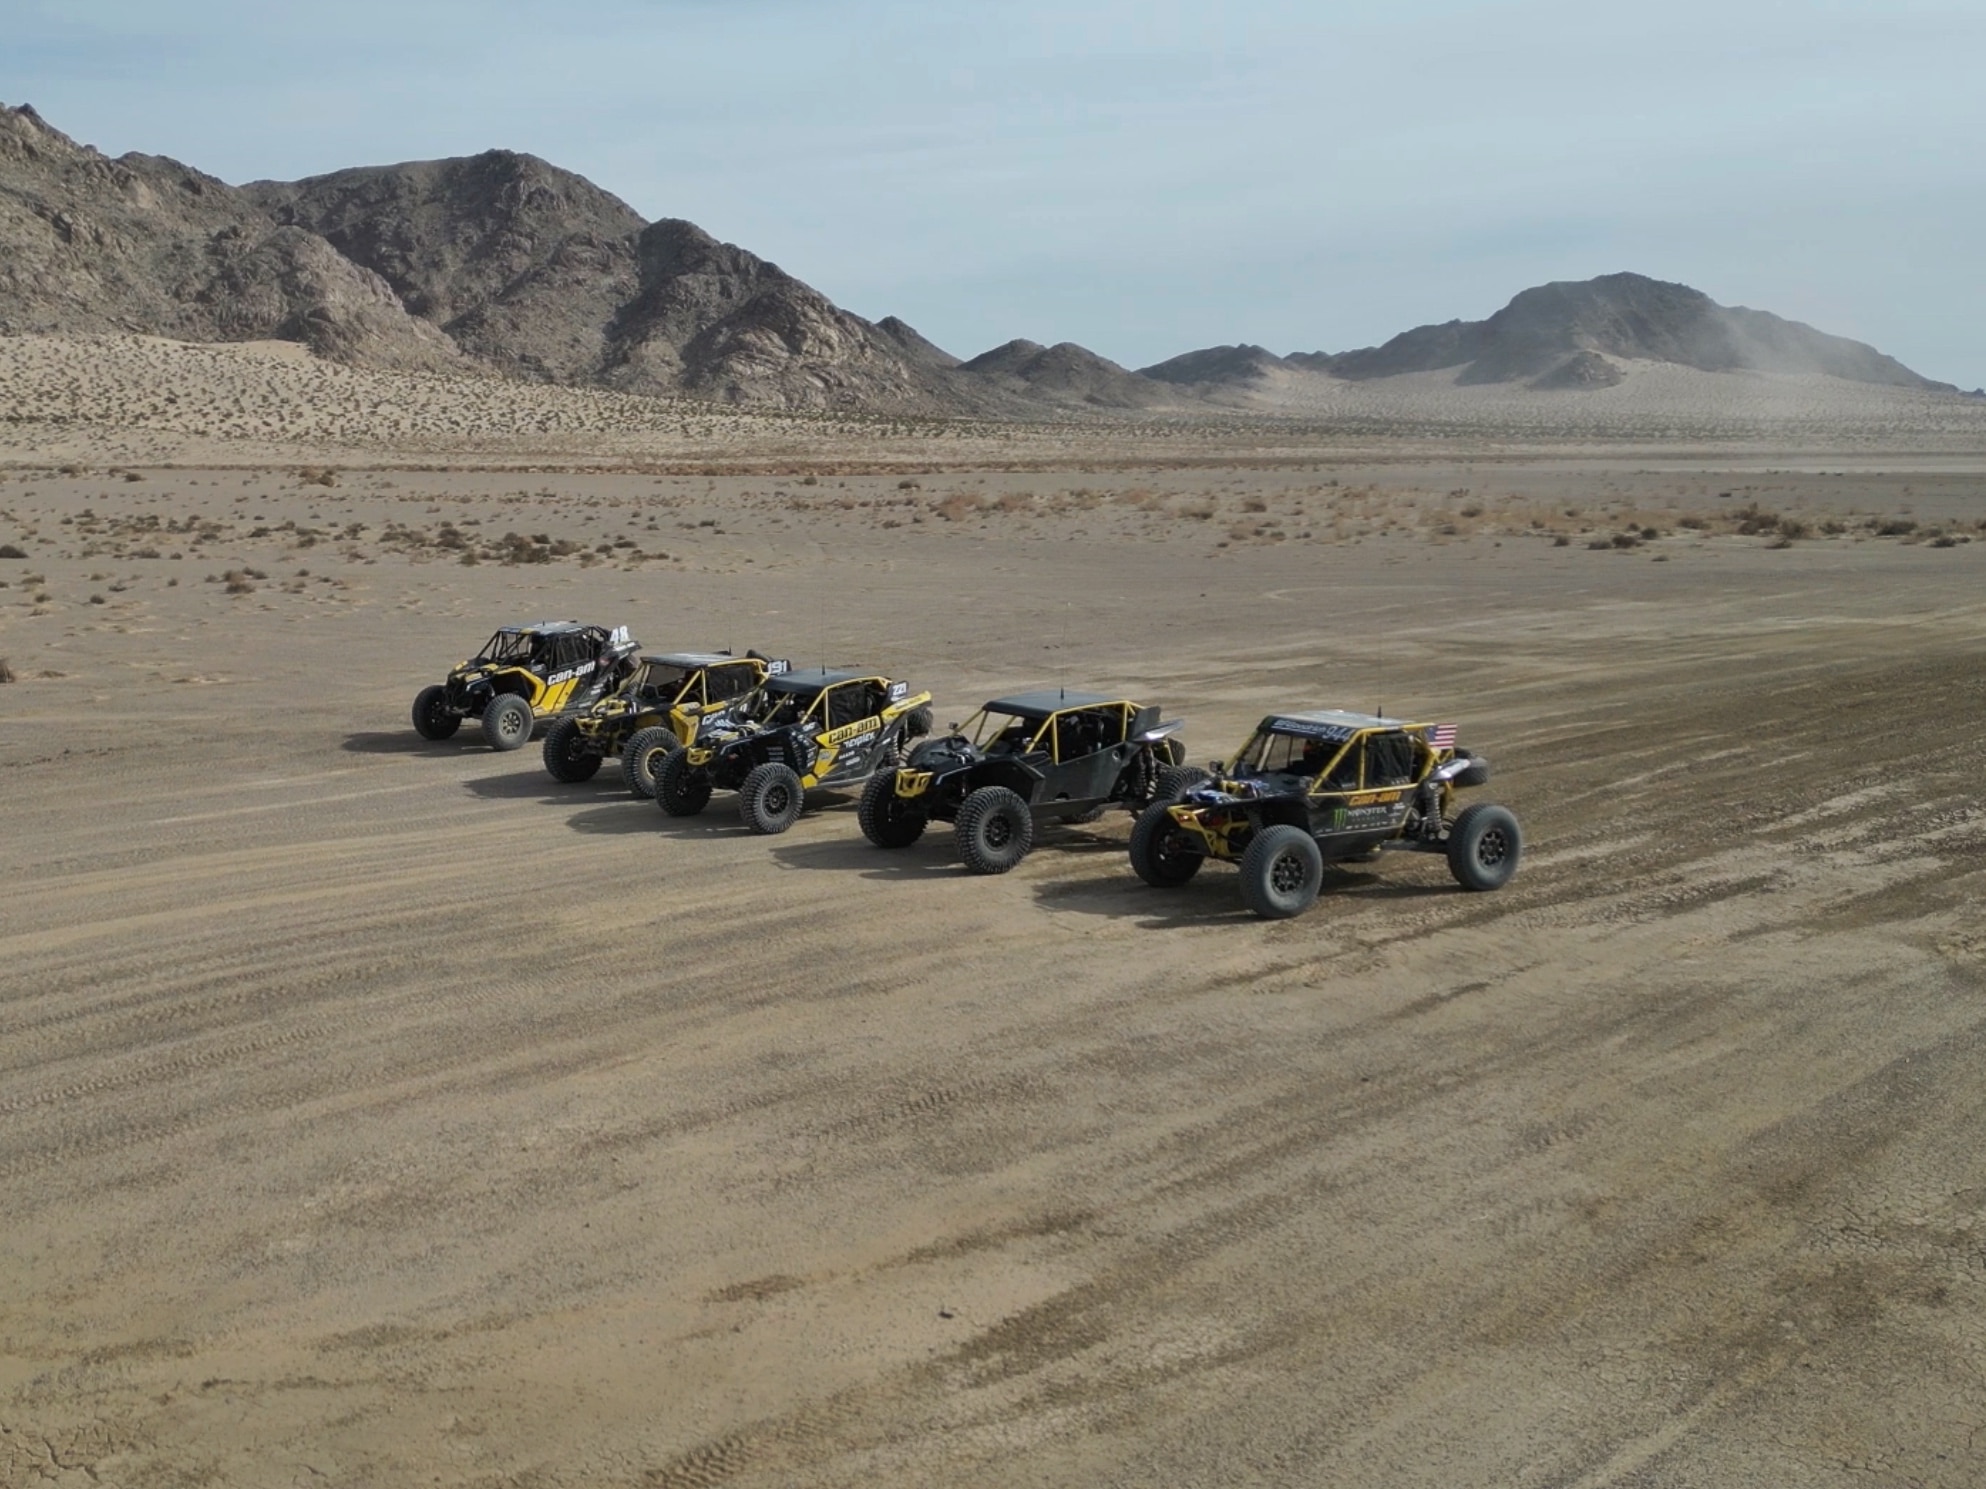 A row of custom-built Can-Am side-by-sides driving next to one another on a dirt trail.